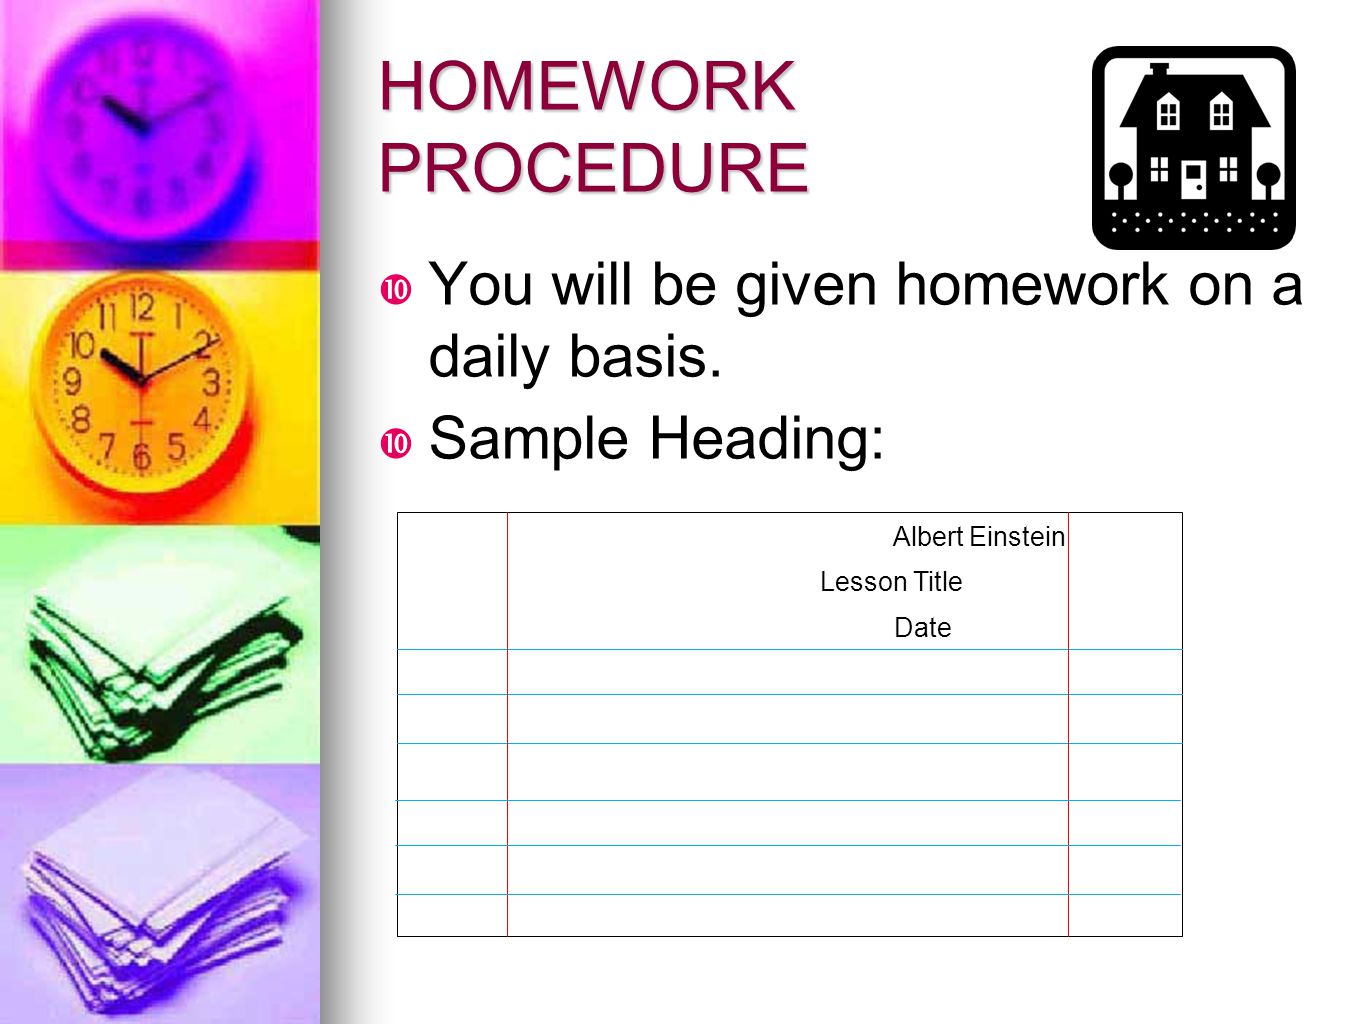 HOMEWORK PROCEDURE You will be given homework on a daily basis.